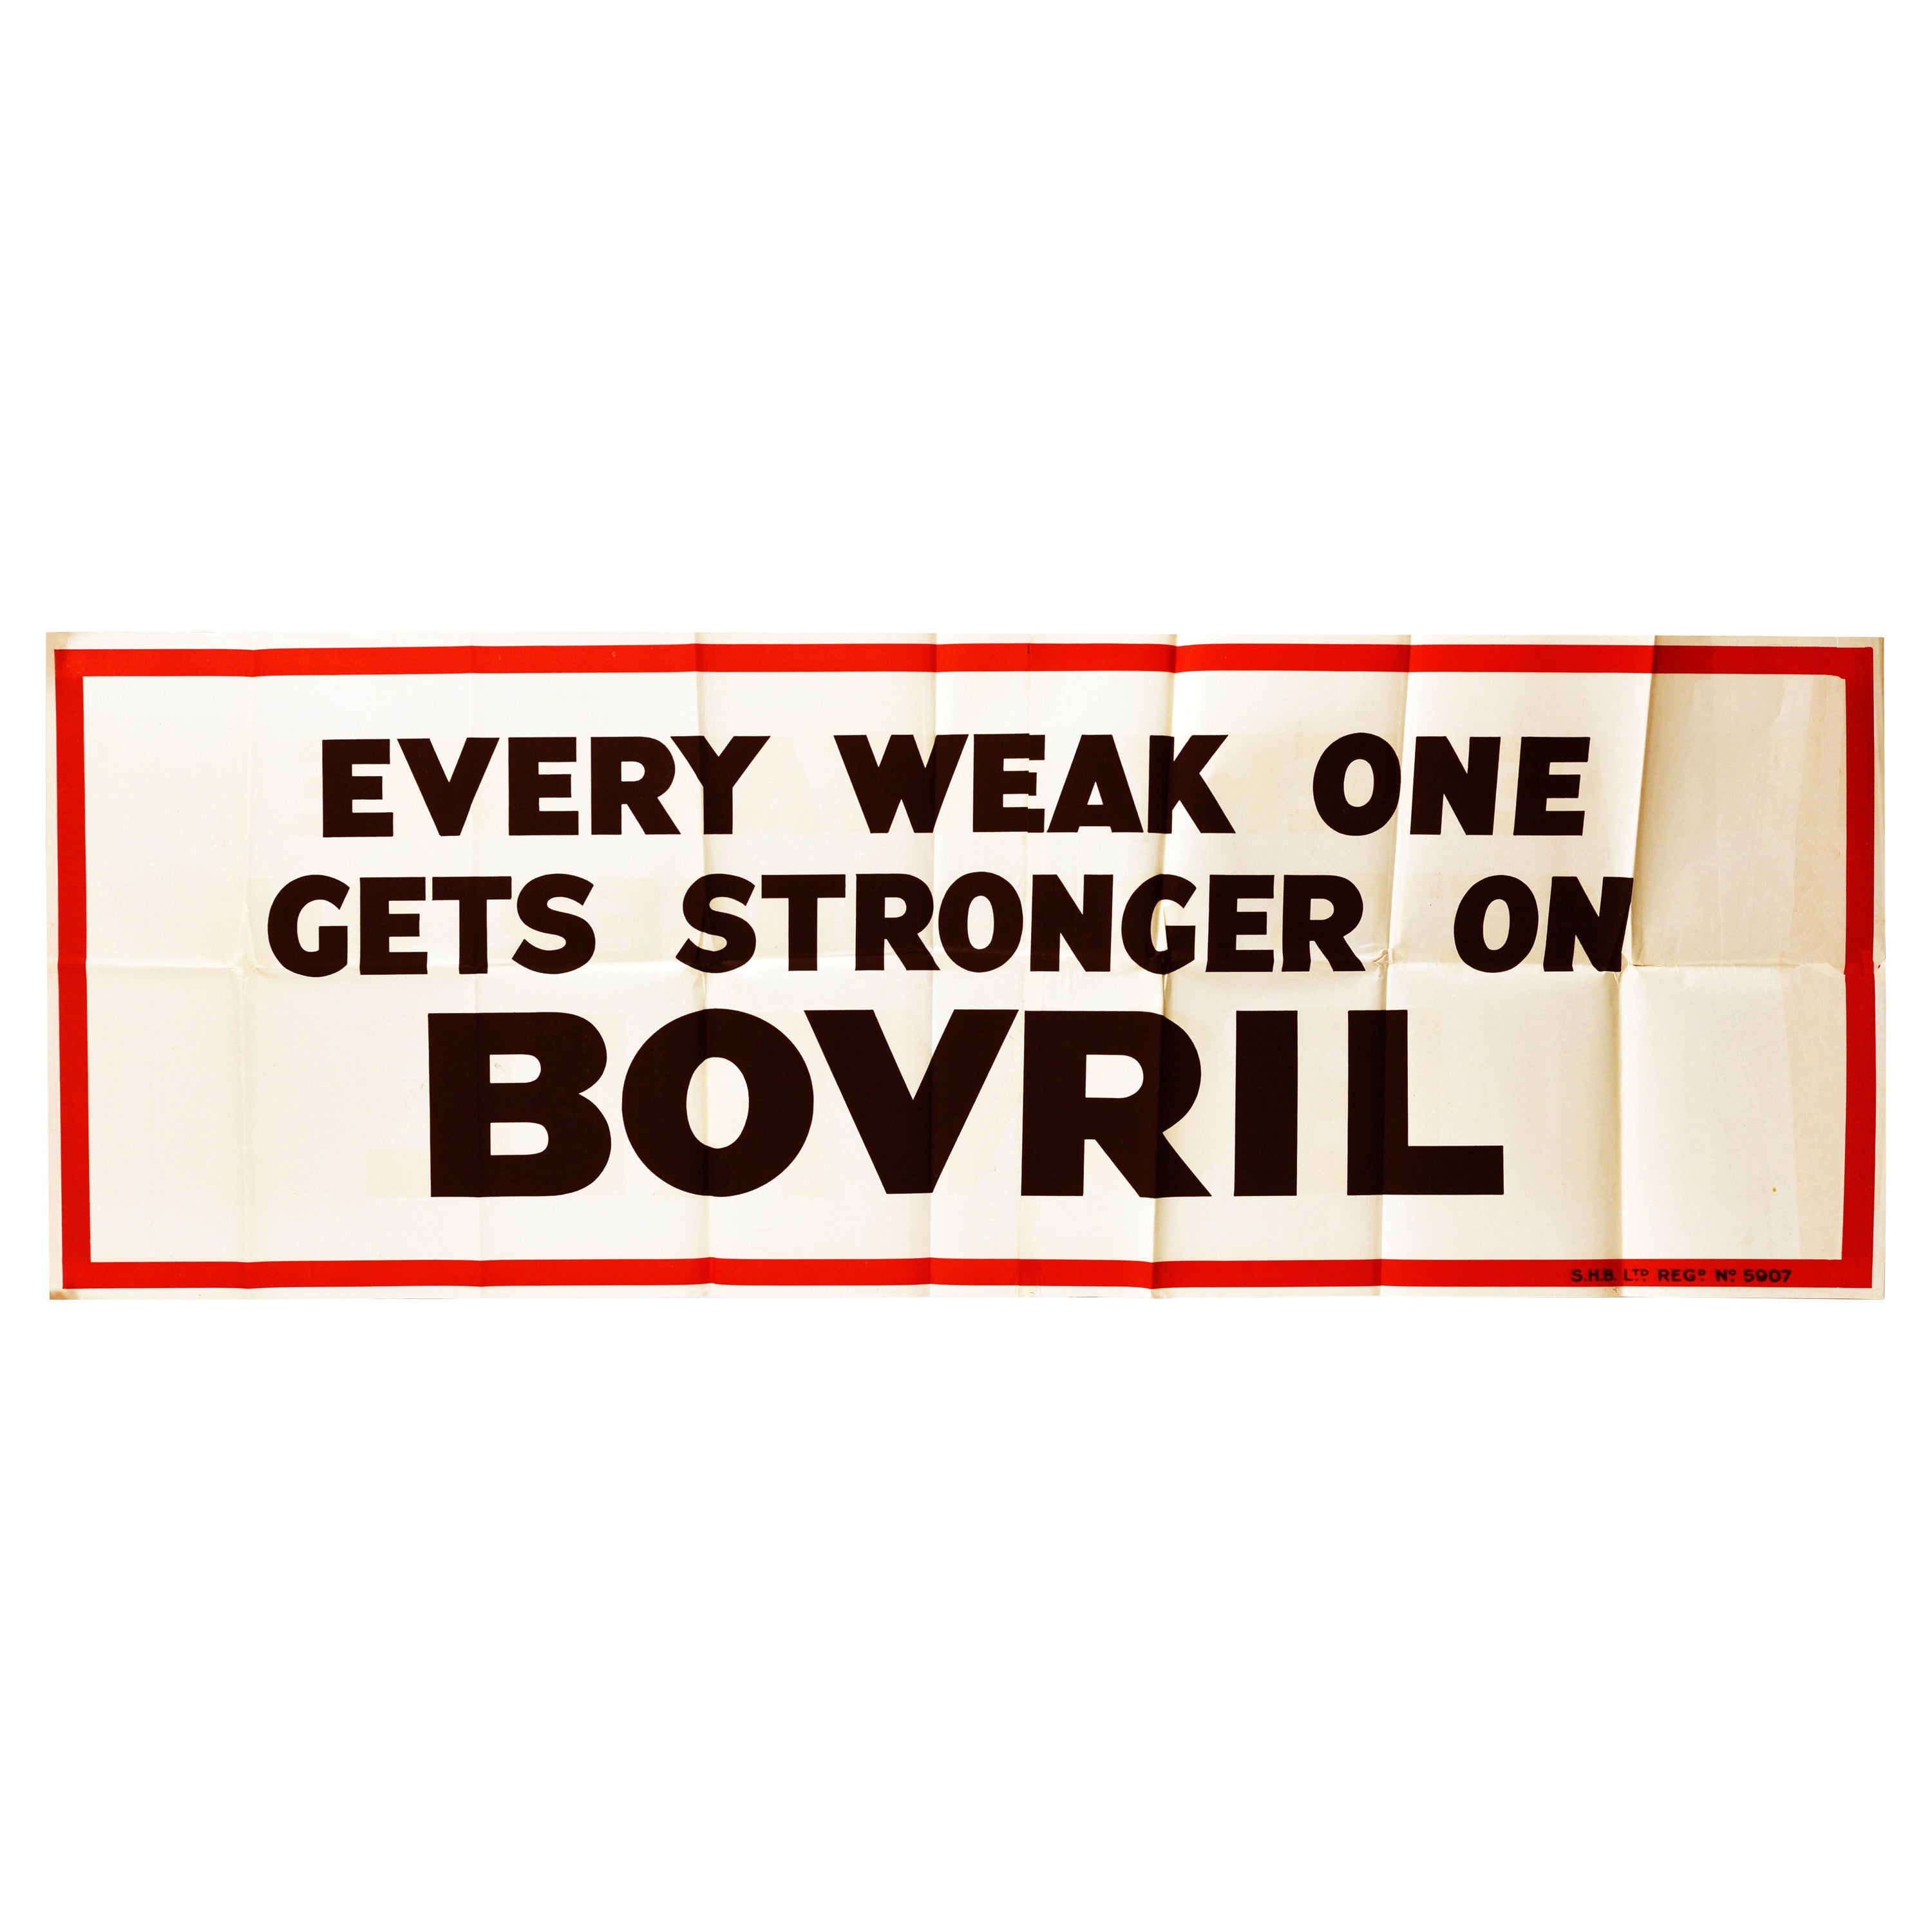 Original Vintage Poster Every Weak One Gets Stronger On Bovril Word Play Health For Sale